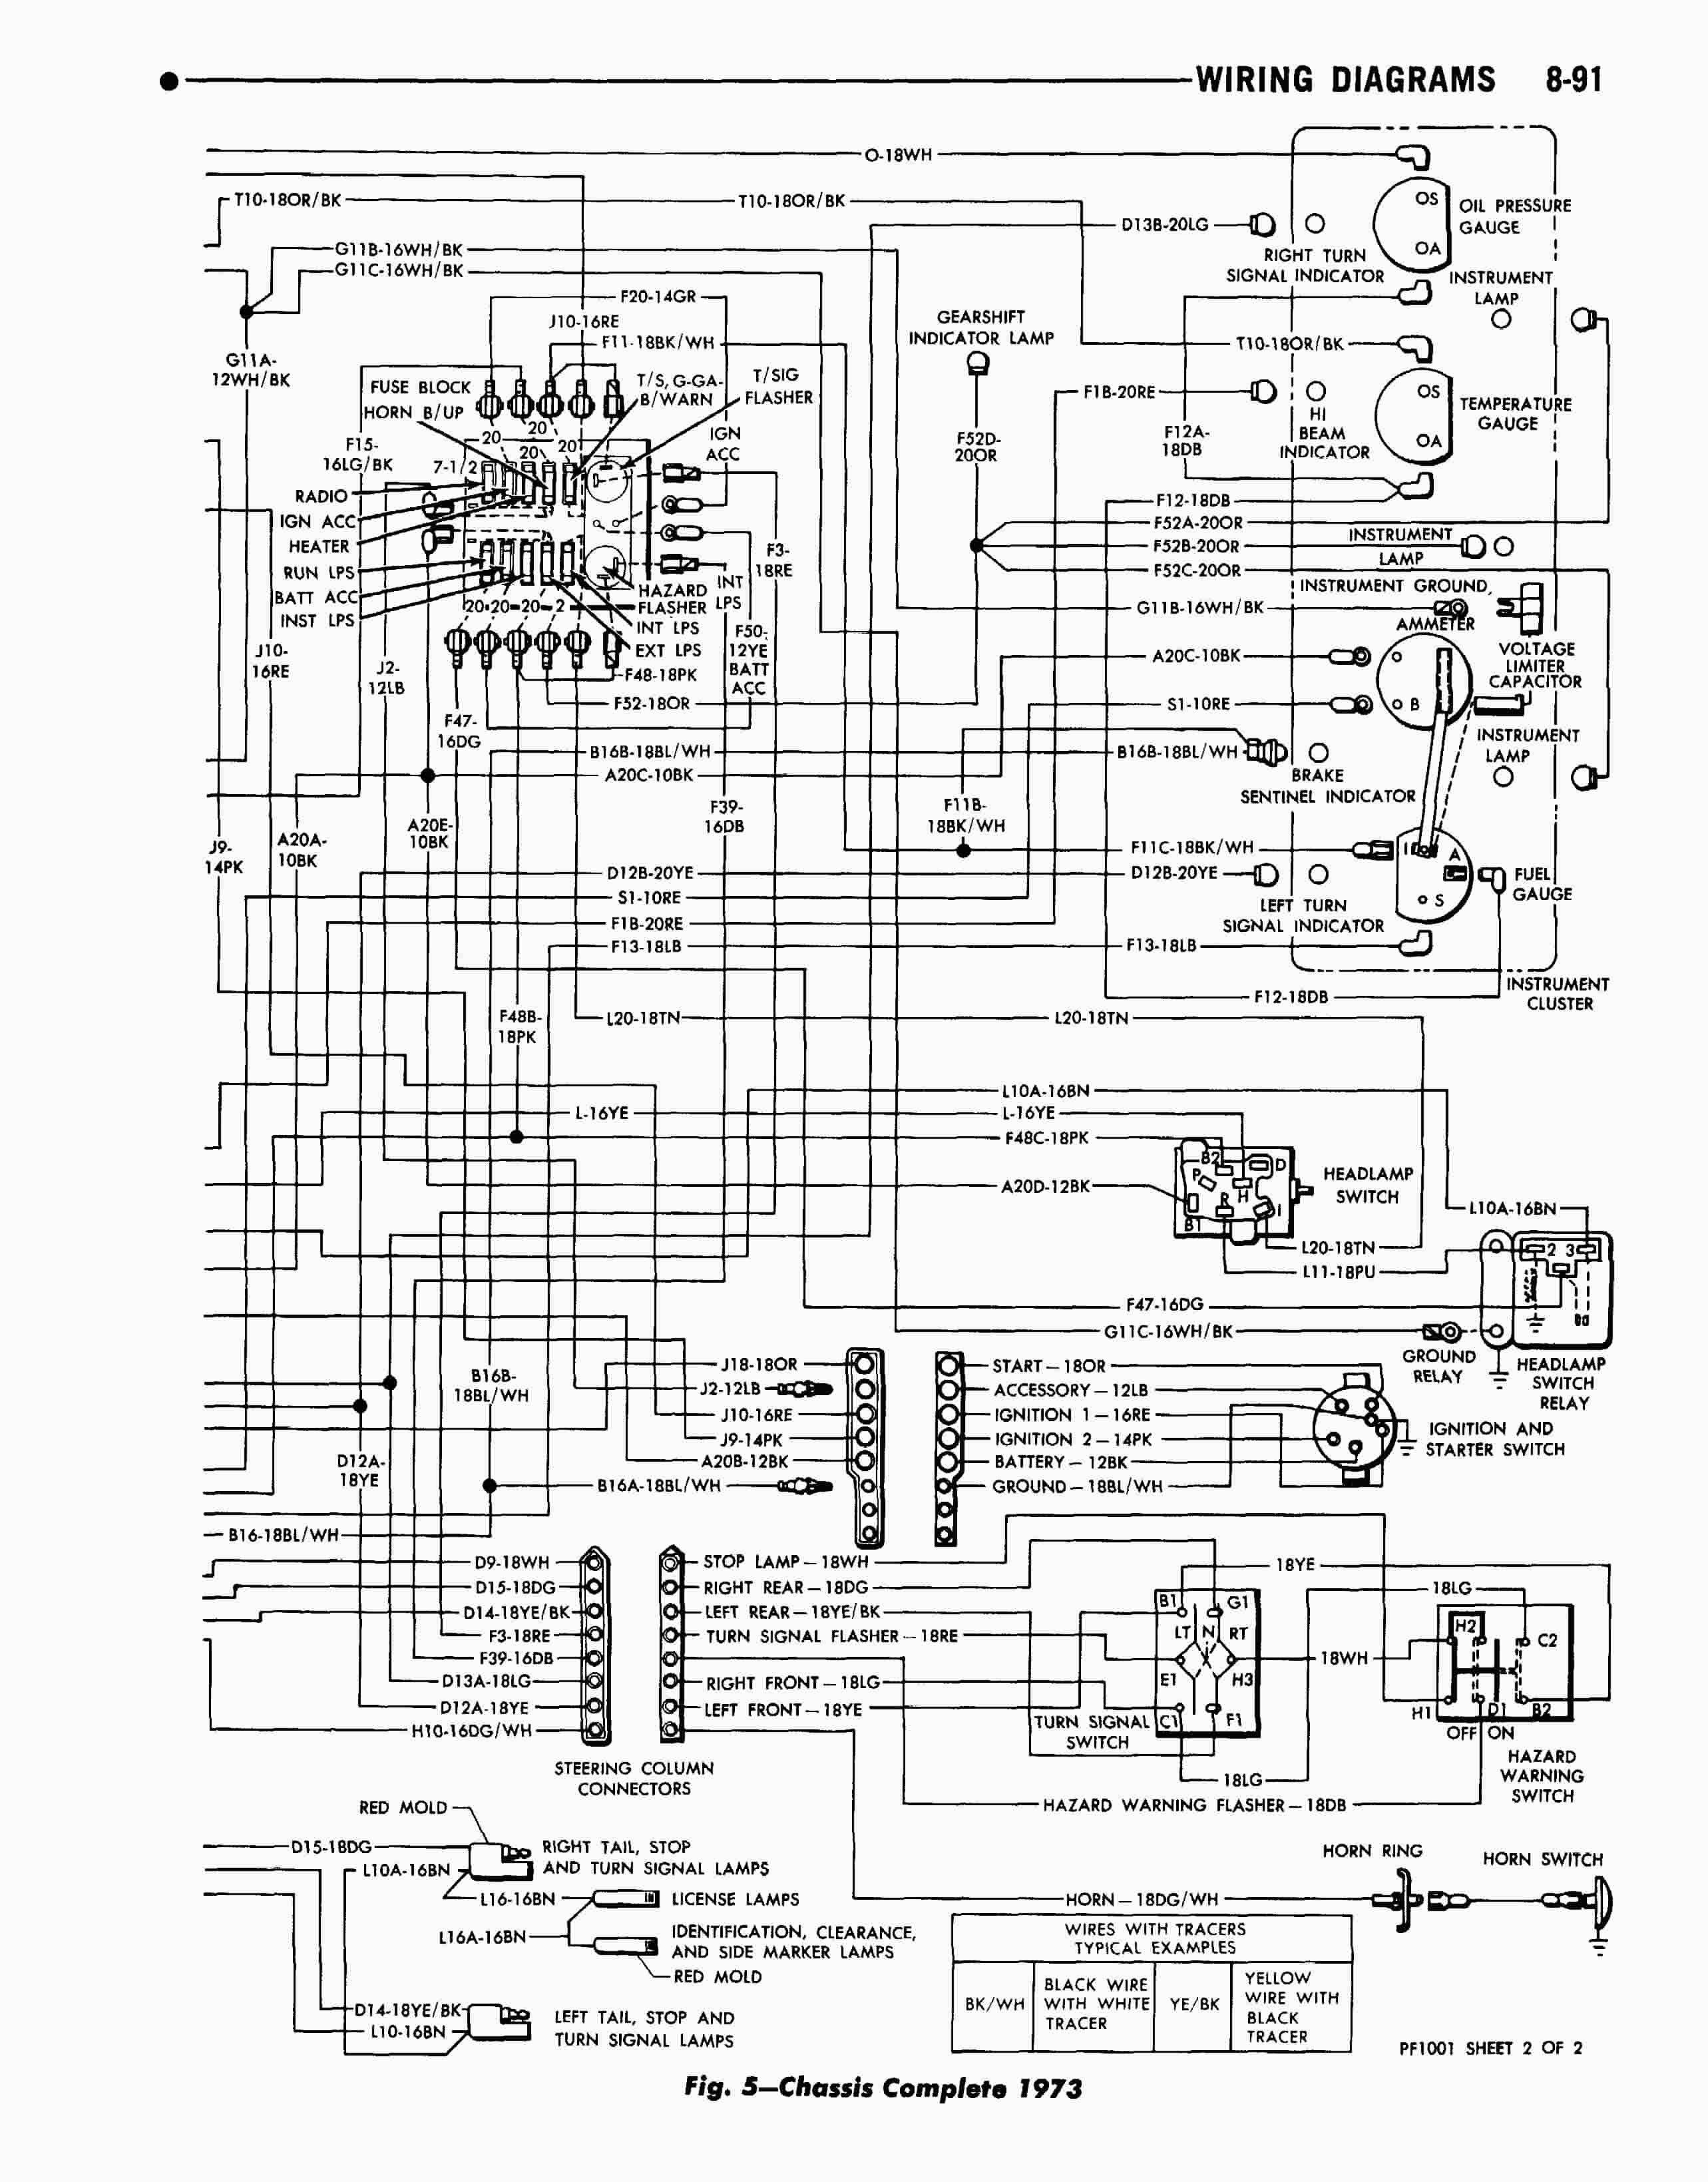 dave s place 73 dodge class a chassis wiring diagram rh dave78chieftain 1985 Chevy Winnebago Wiring Diagram Winnebago Motorhome